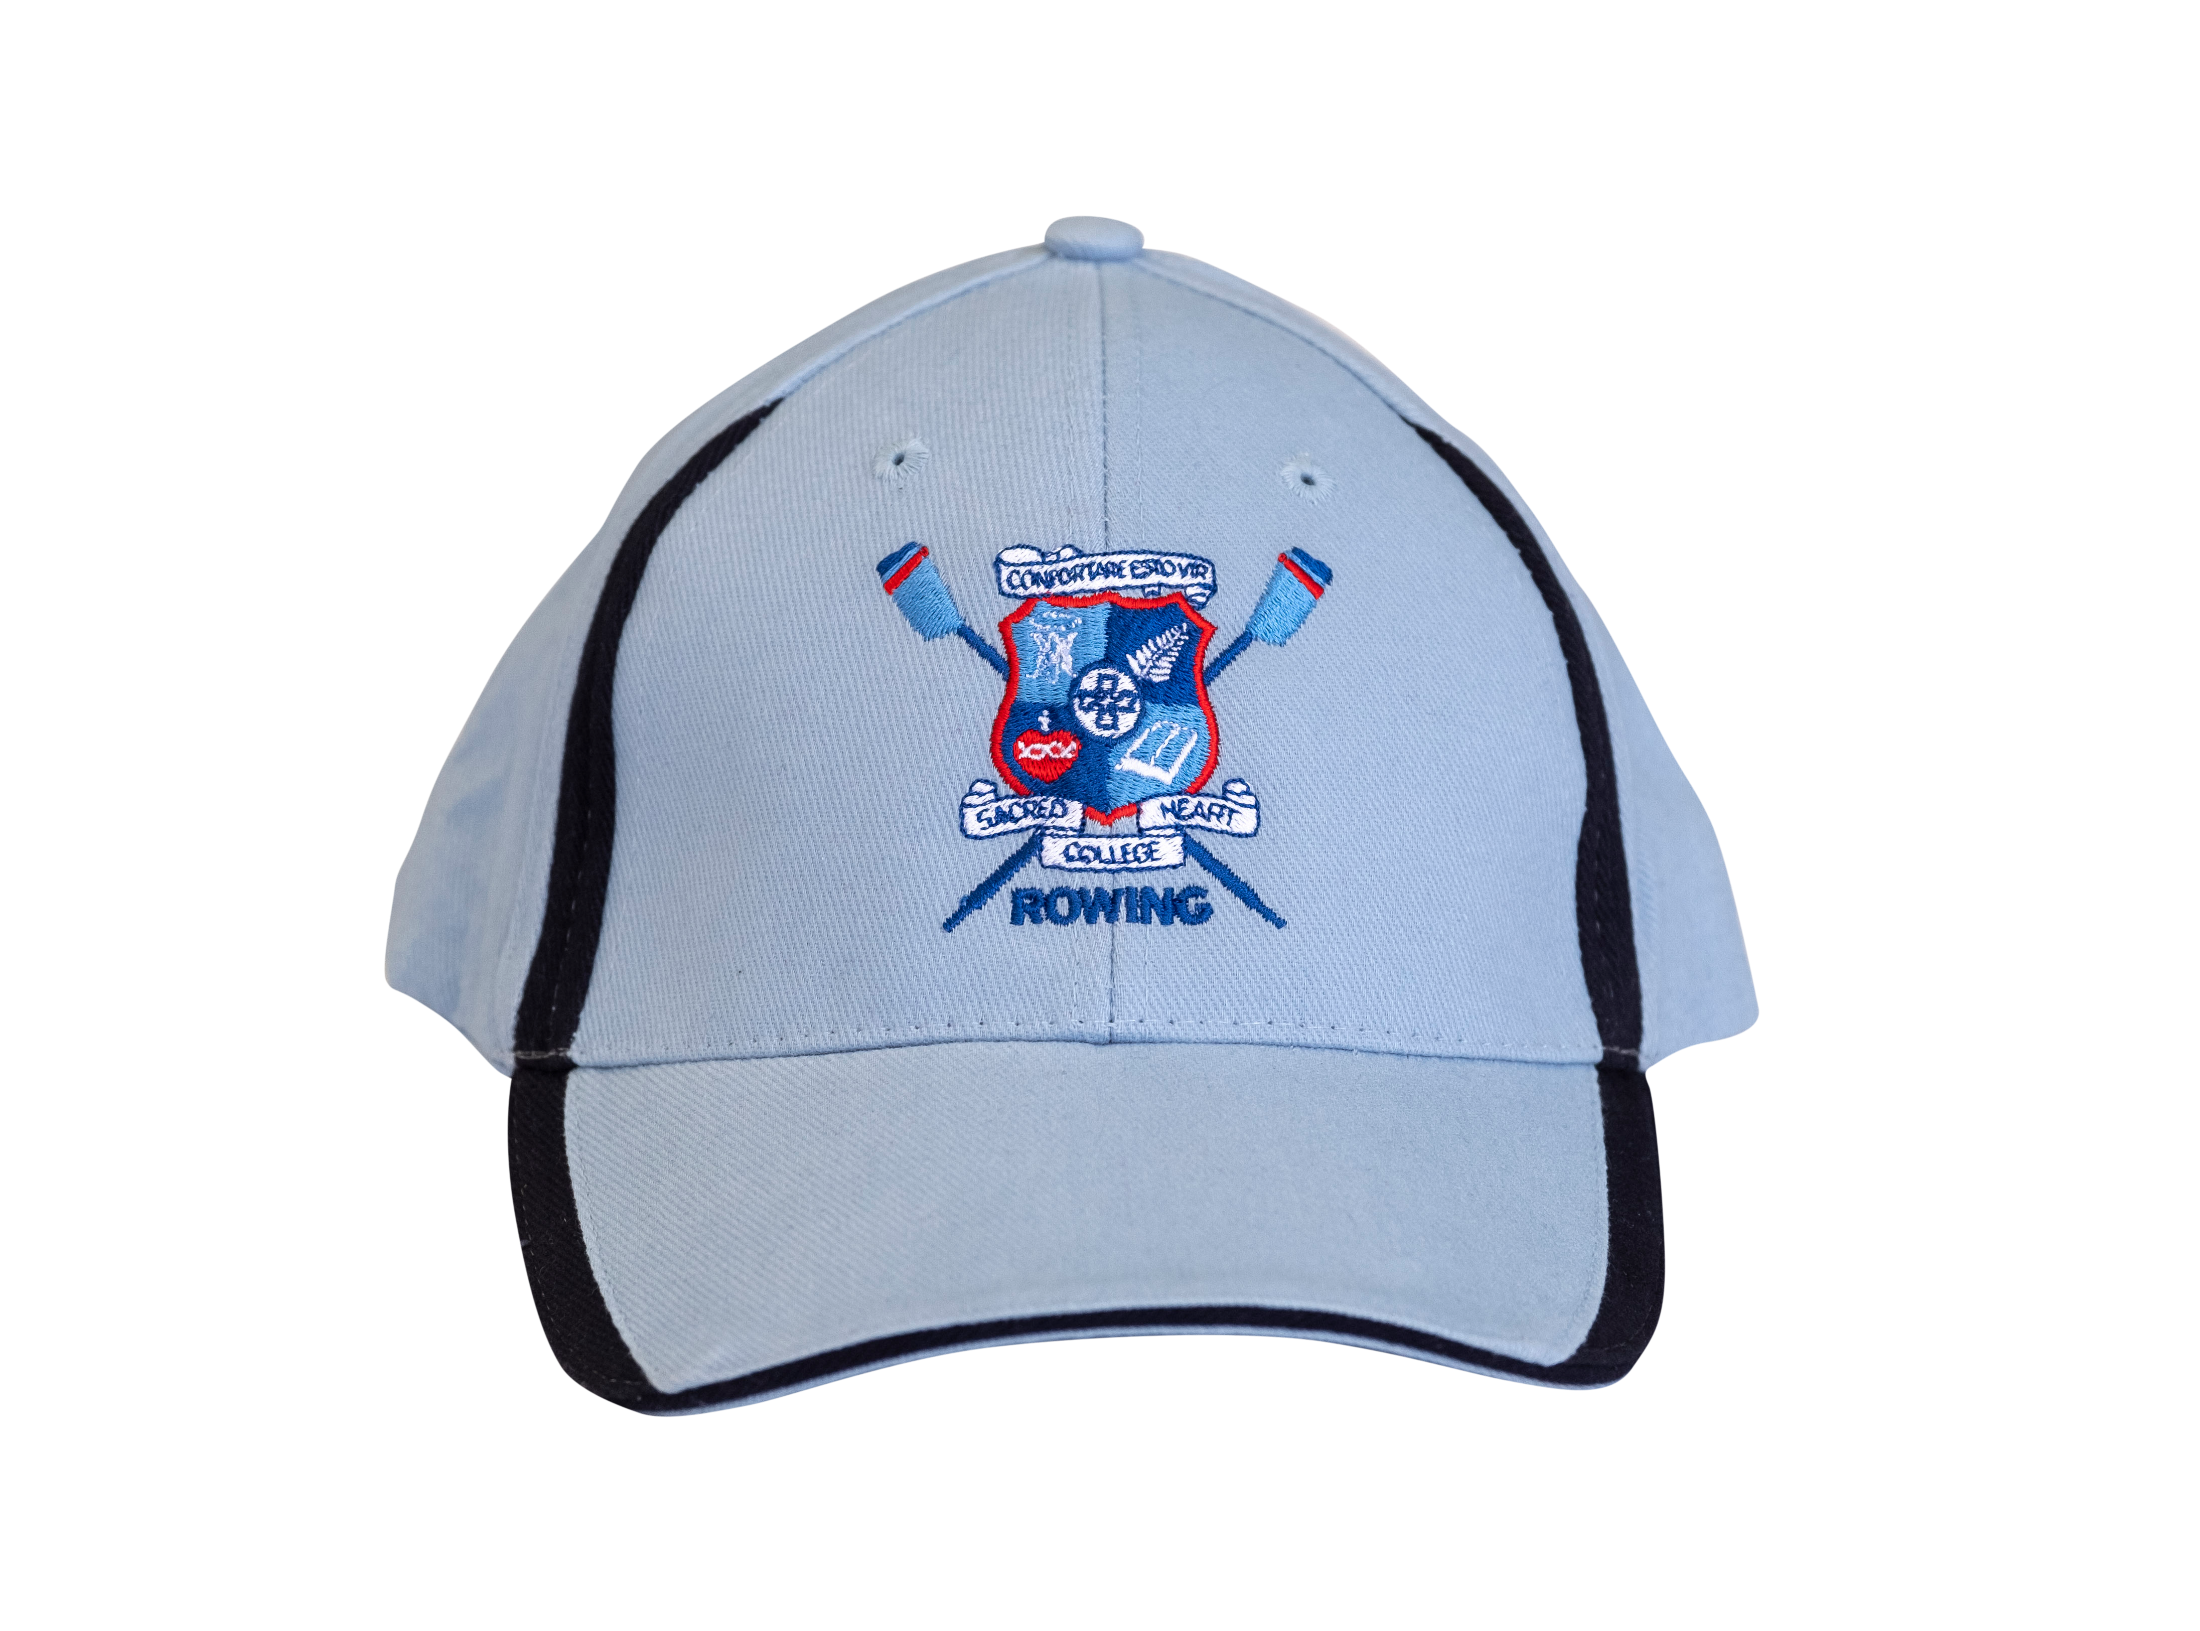 Rowing Supporters Cap